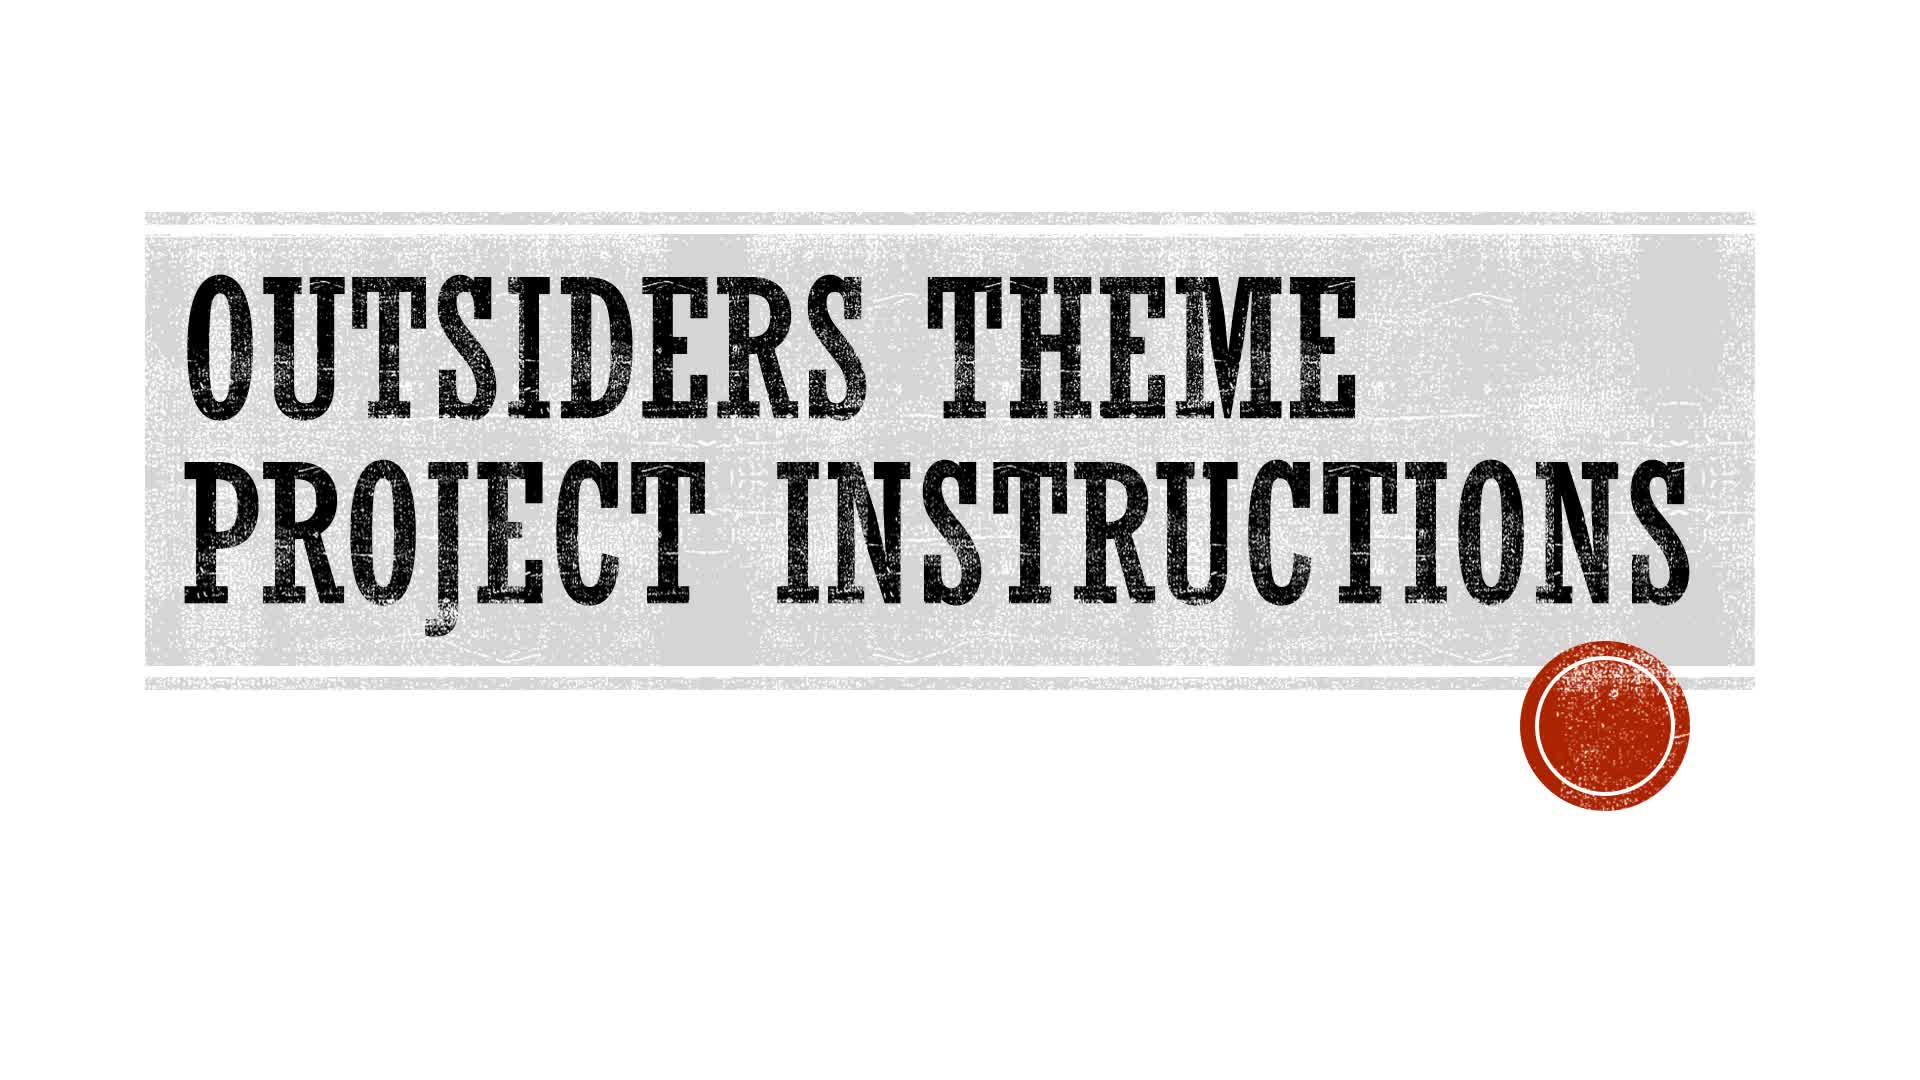 The Outsiders Theme Project Instructions